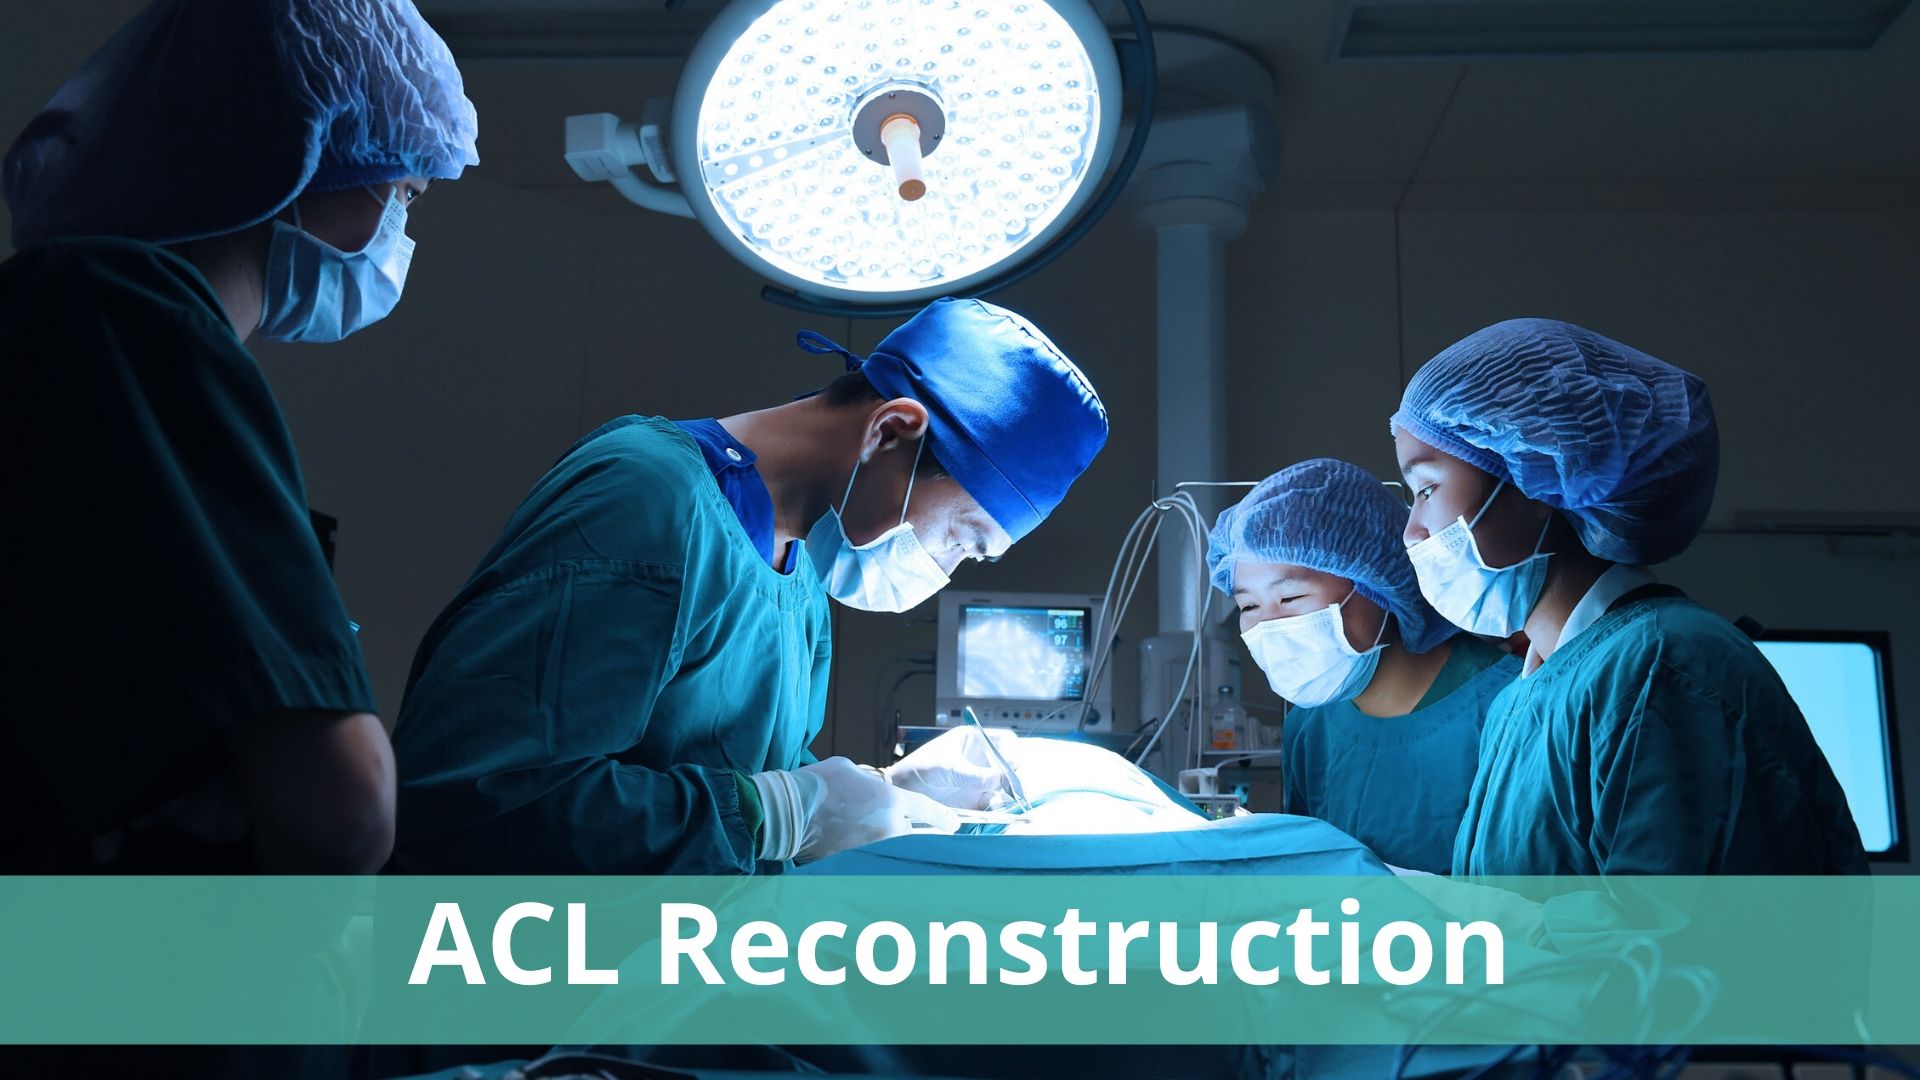 ACL Reconstruction: Is surgery the only choice?